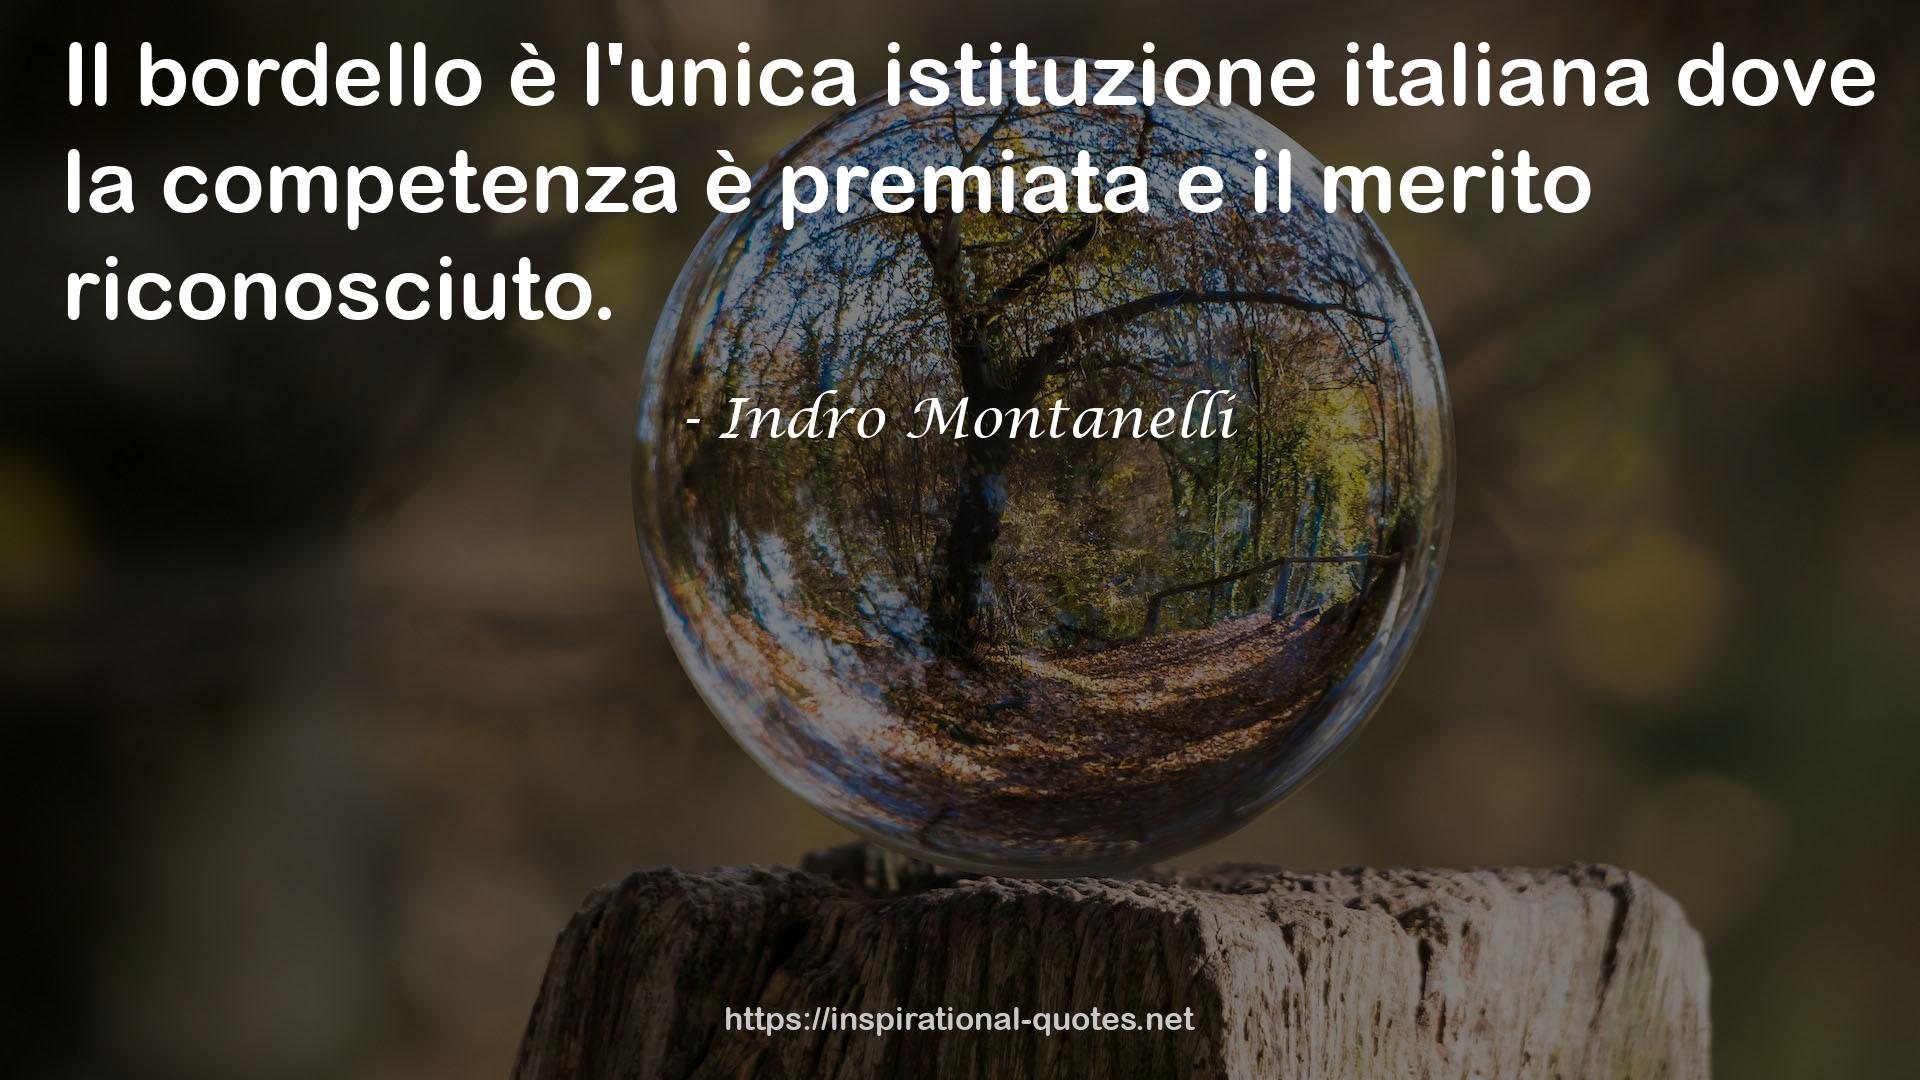 Indro Montanelli QUOTES